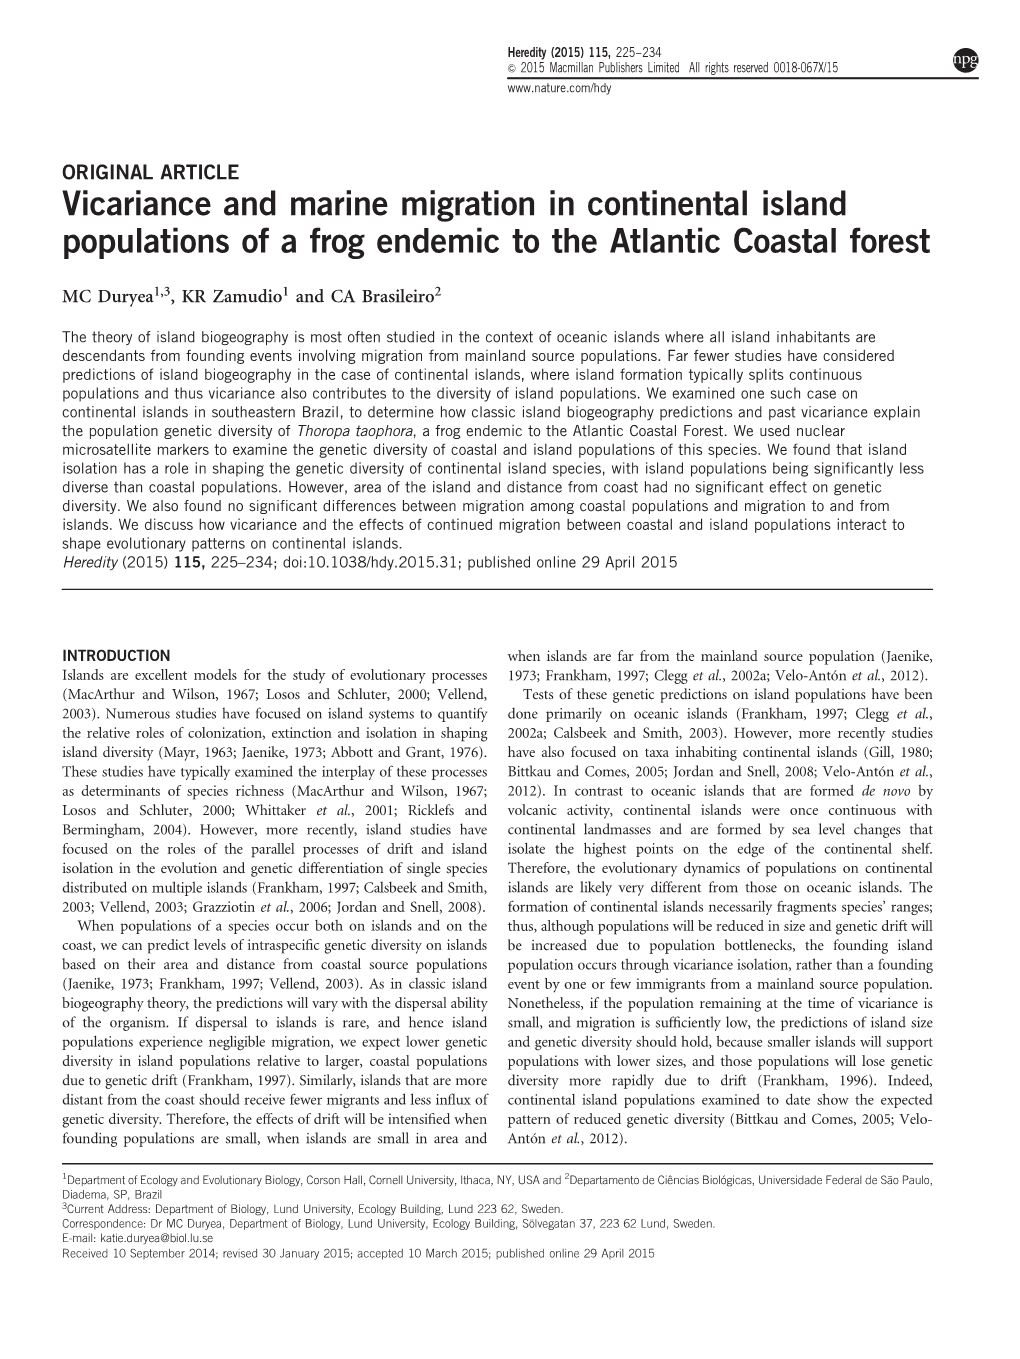 Vicariance and Marine Migration in Continental Island Populations of a Frog Endemic to the Atlantic Coastal Forest